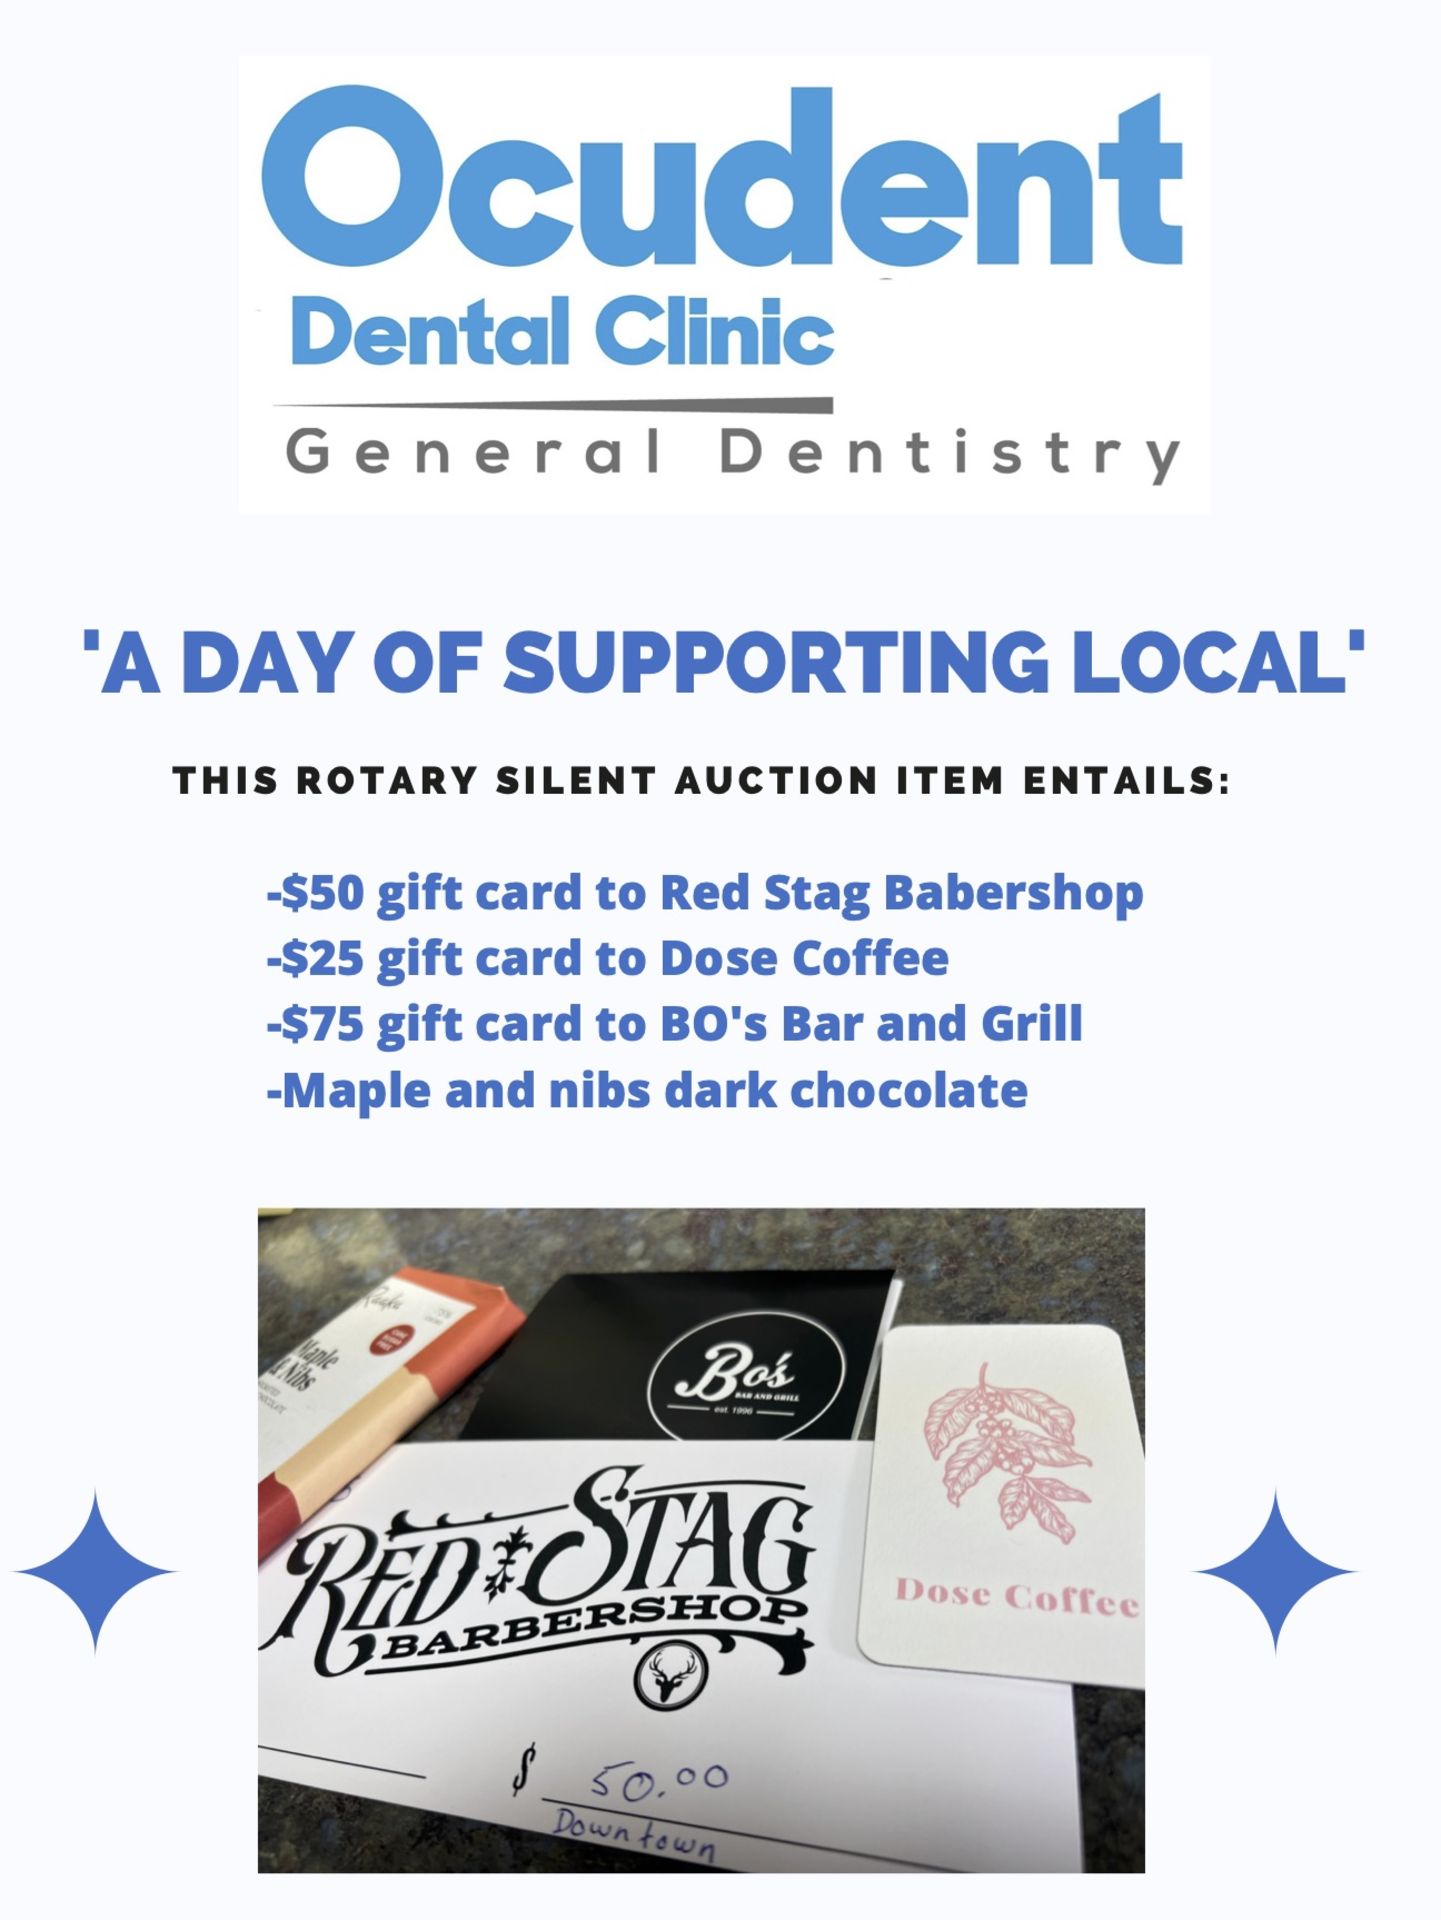 $155 worth of Gift Cards & Chocolate: A day of supporting local! - Image 2 of 2